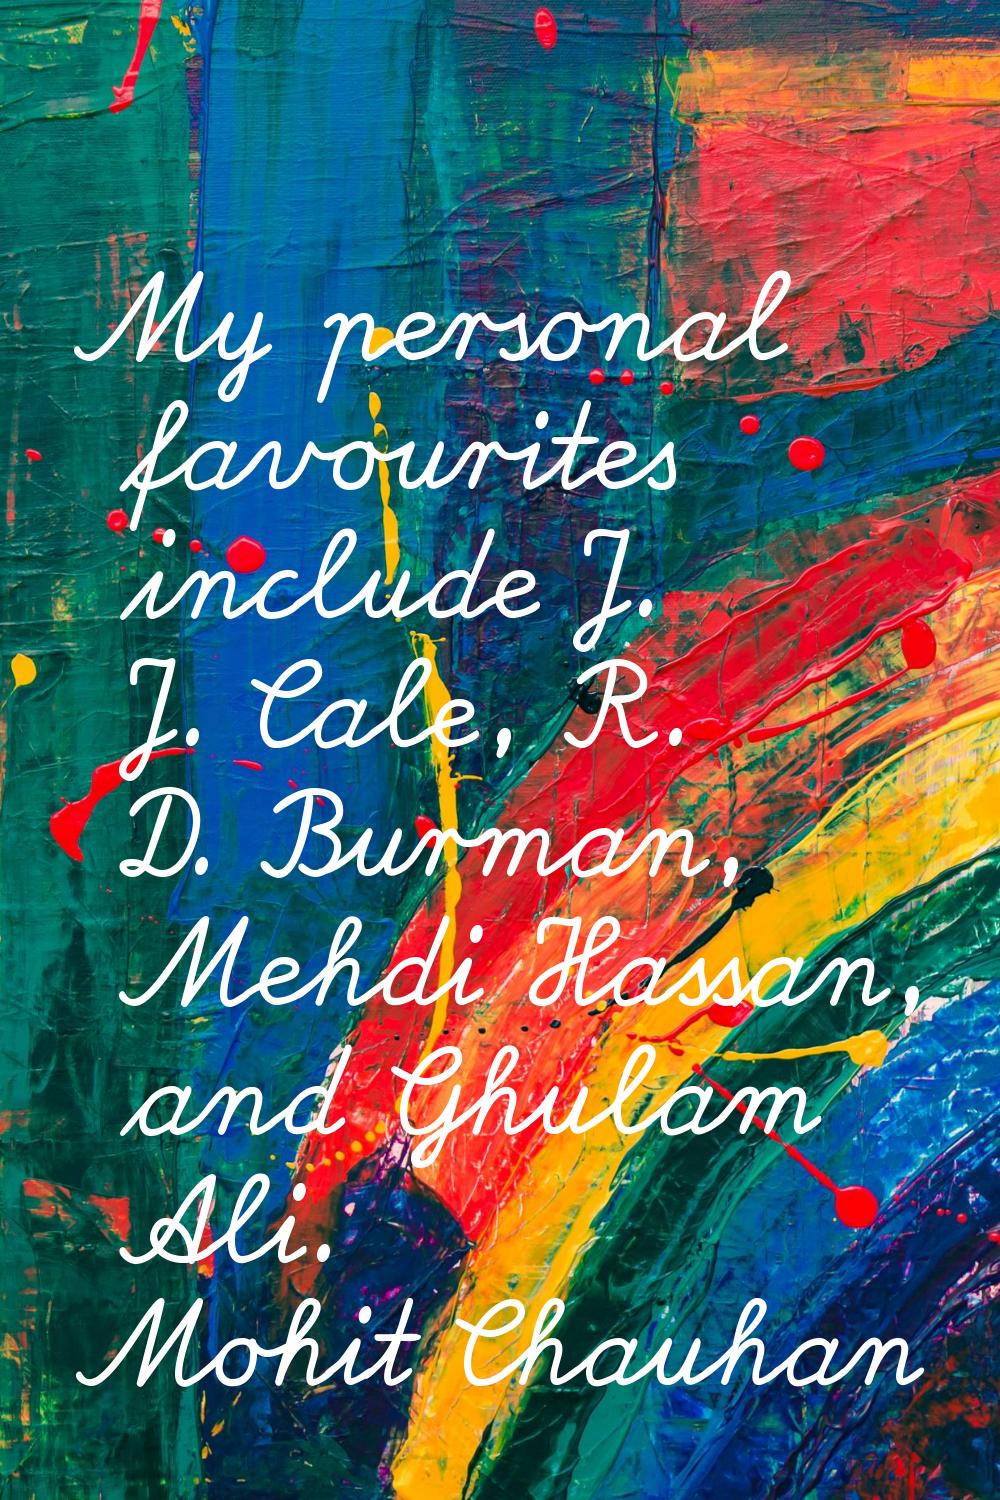 My personal favourites include J. J. Cale, R. D. Burman, Mehdi Hassan, and Ghulam Ali.